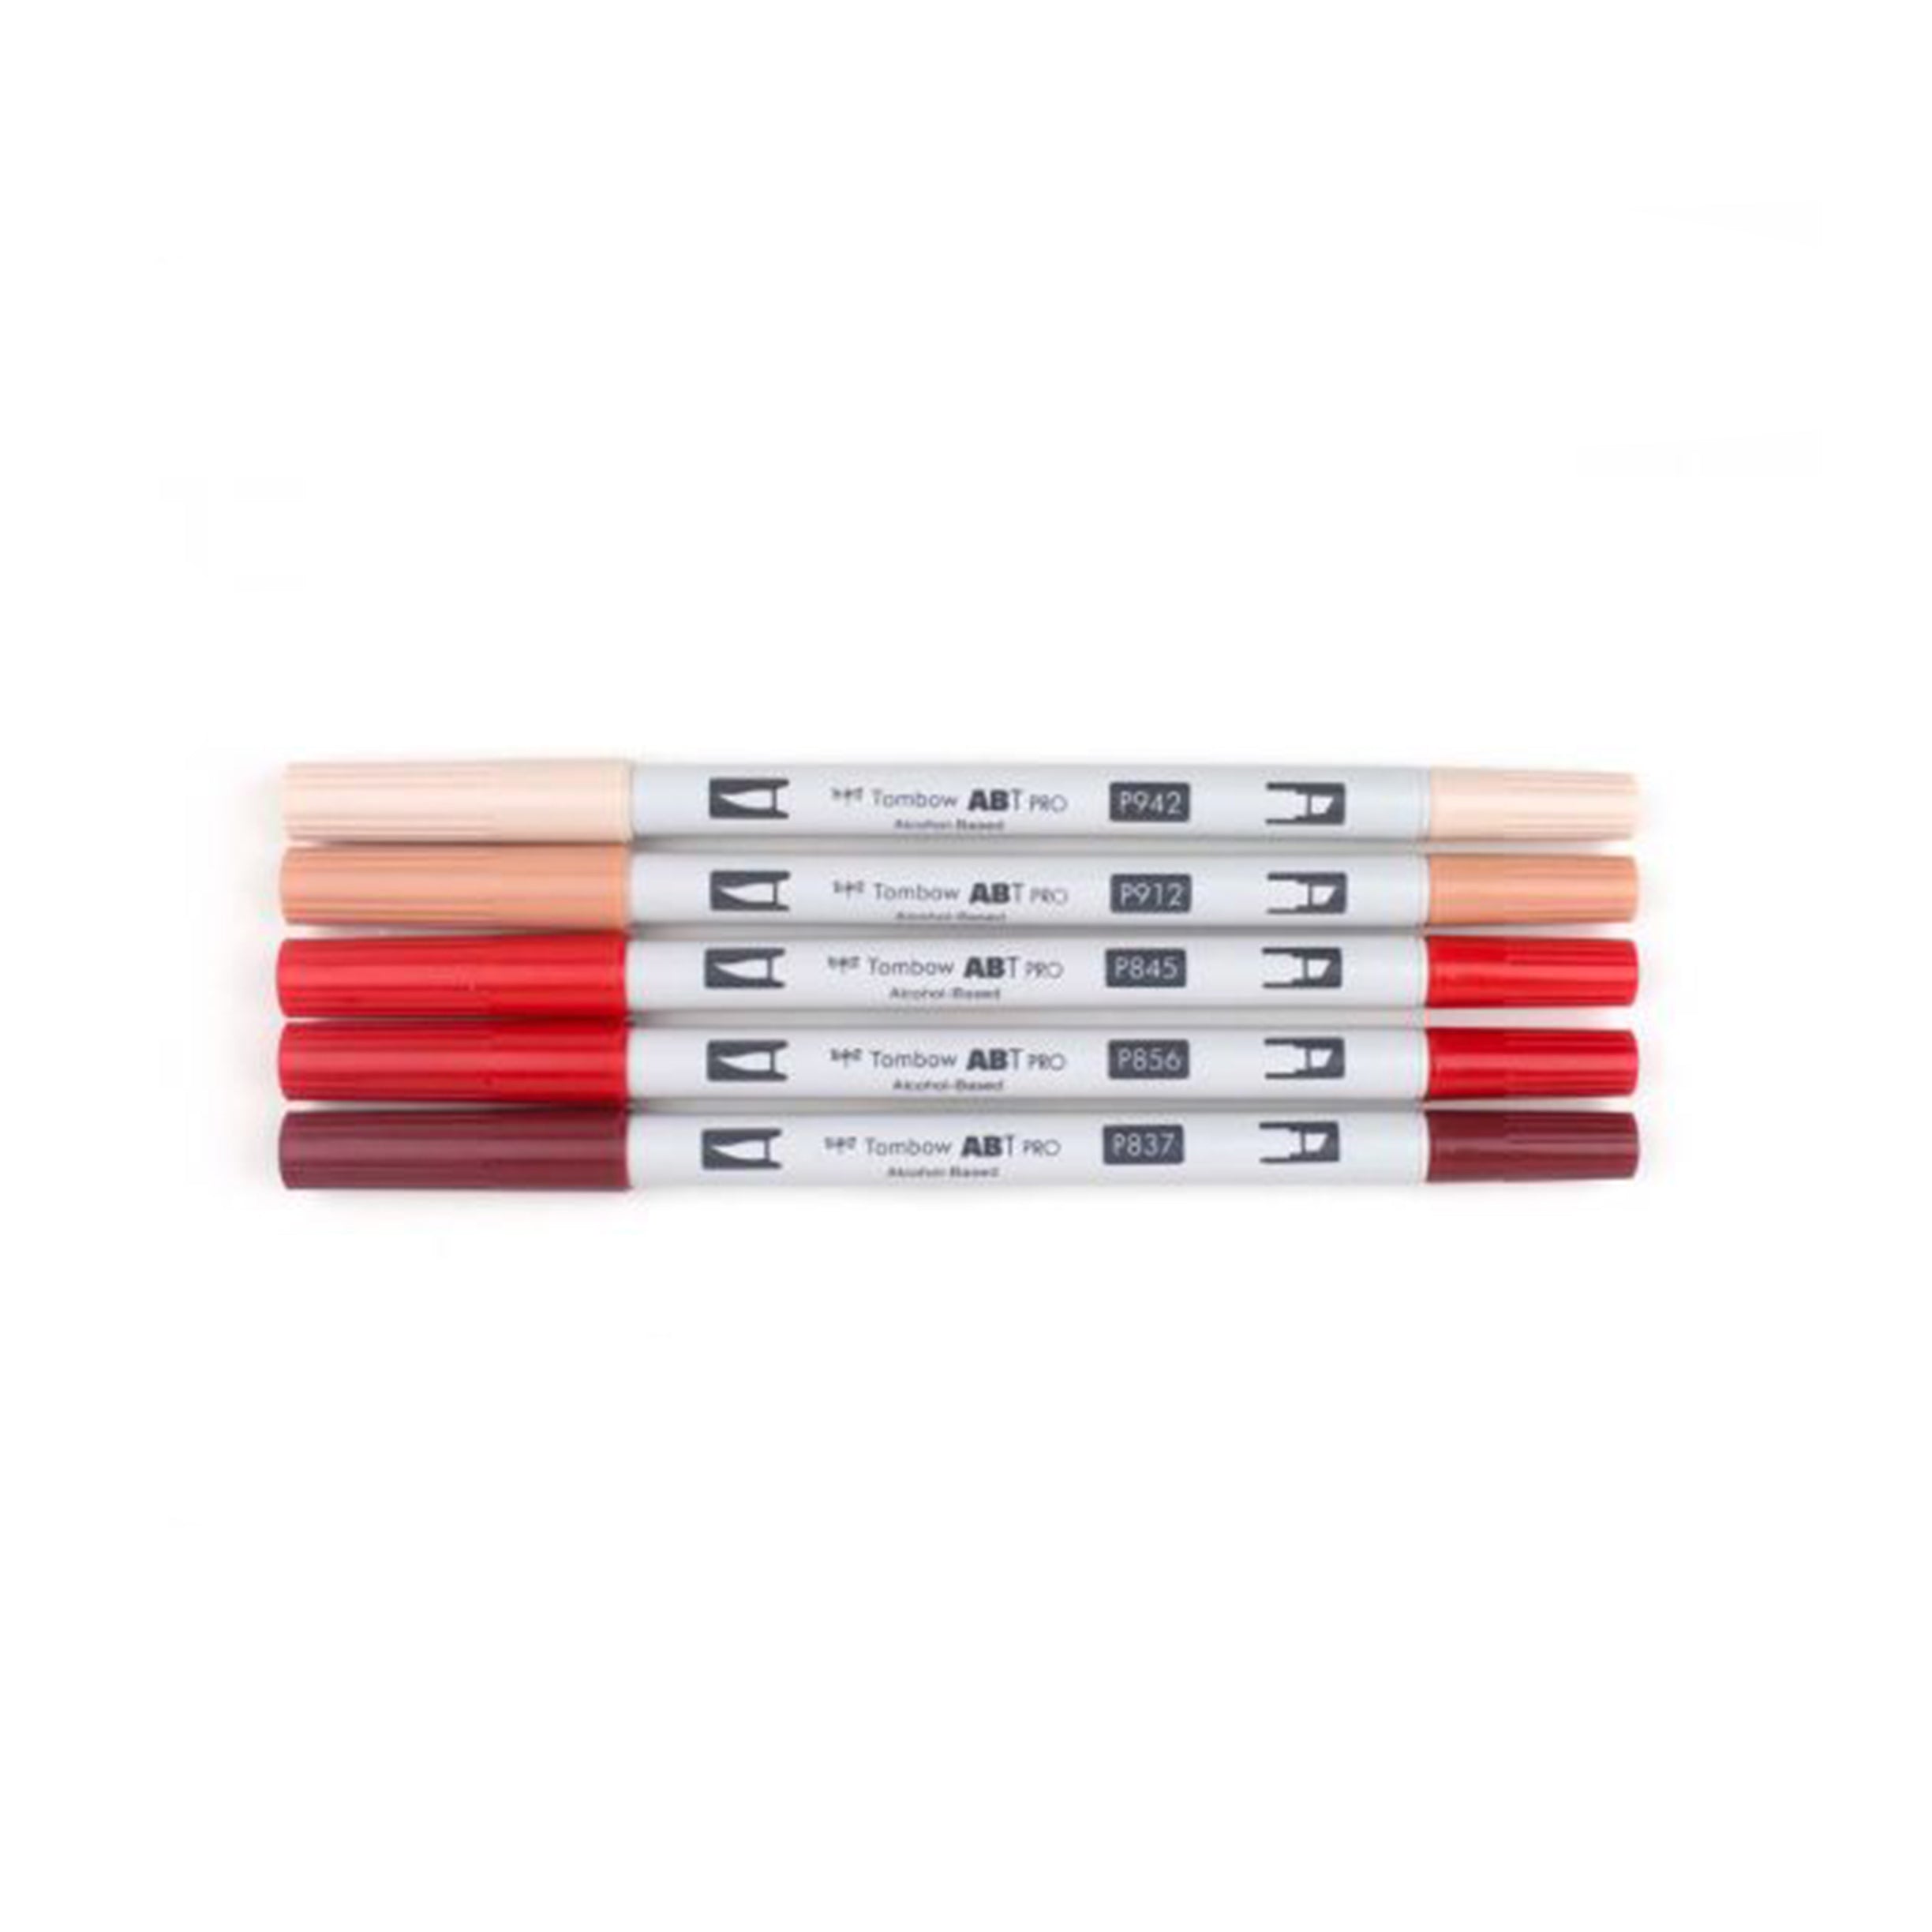 Tombow Abt Pro Alcohol Markers - Red Tones, Set of 5